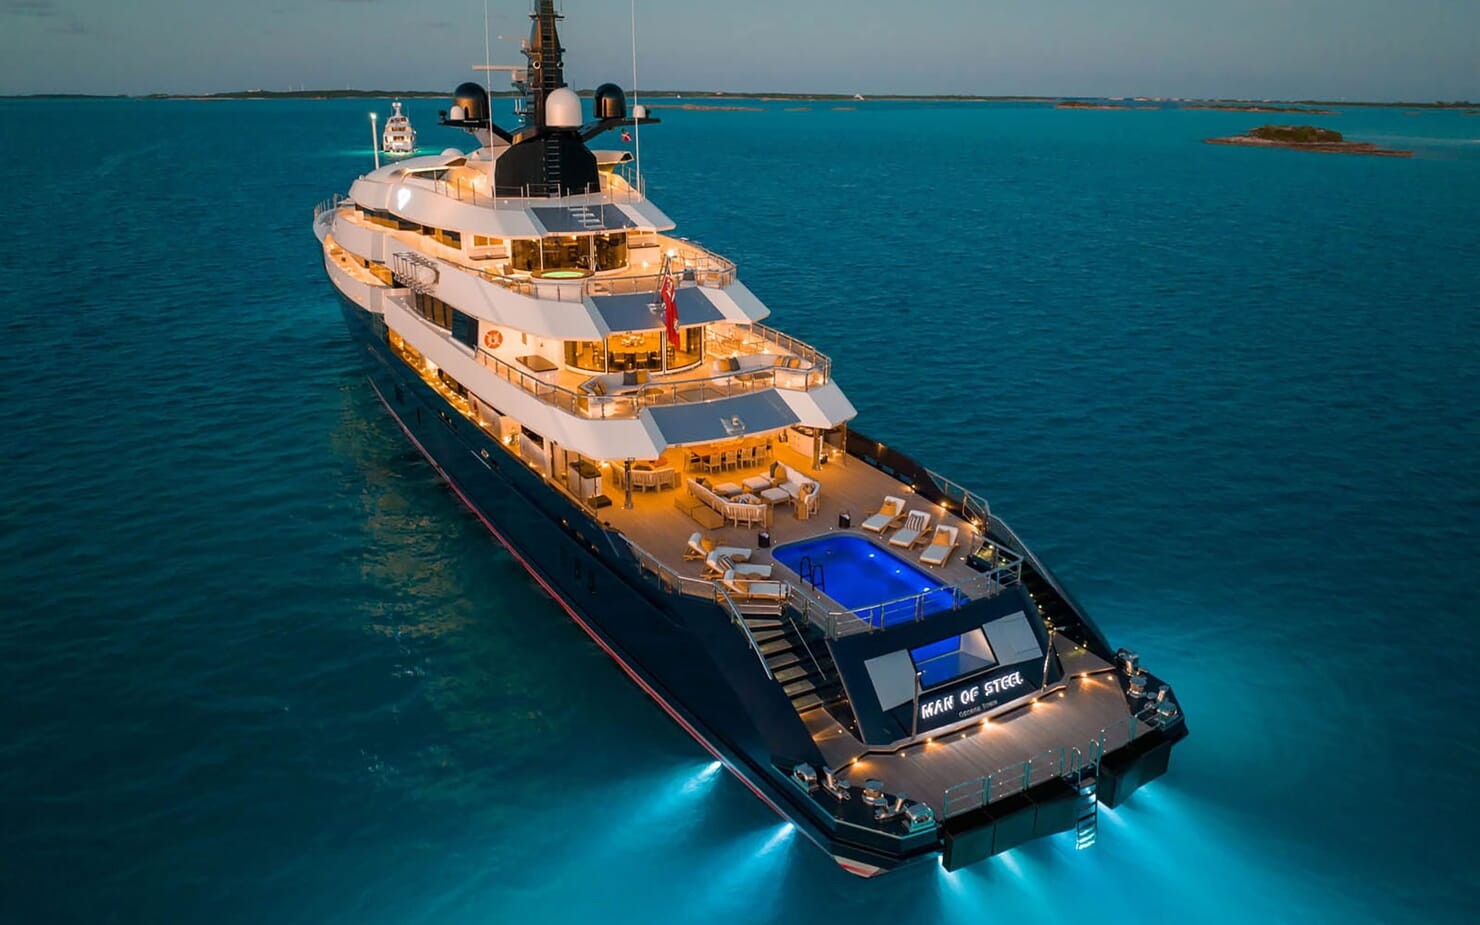 who owns superyacht man of steel